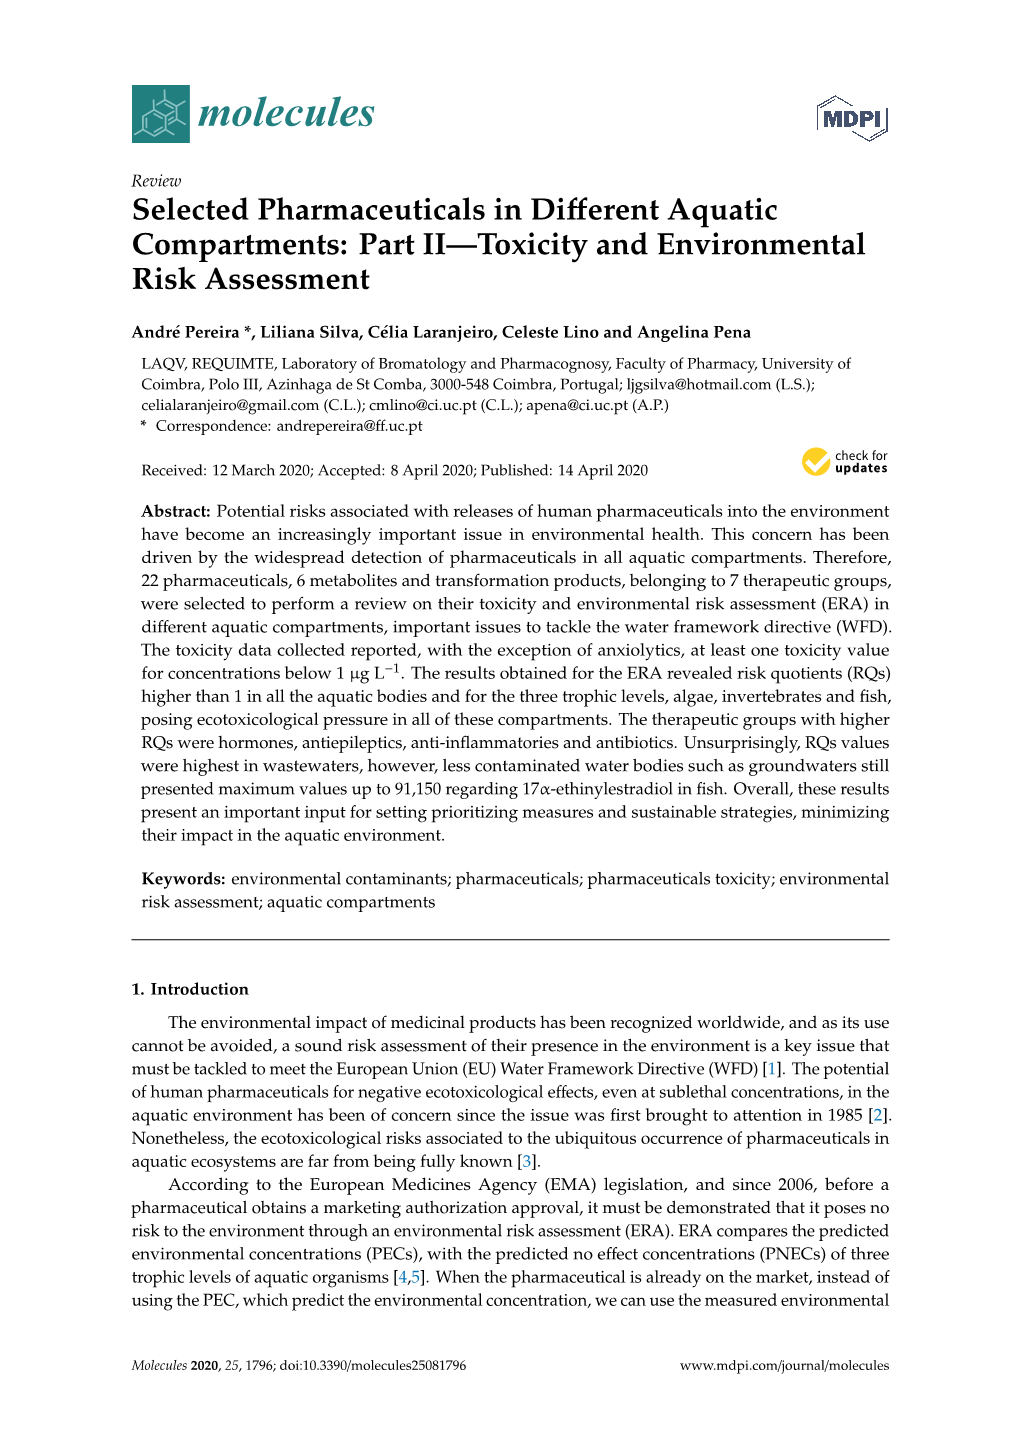 Part II—Toxicity and Environmental Risk Assessment